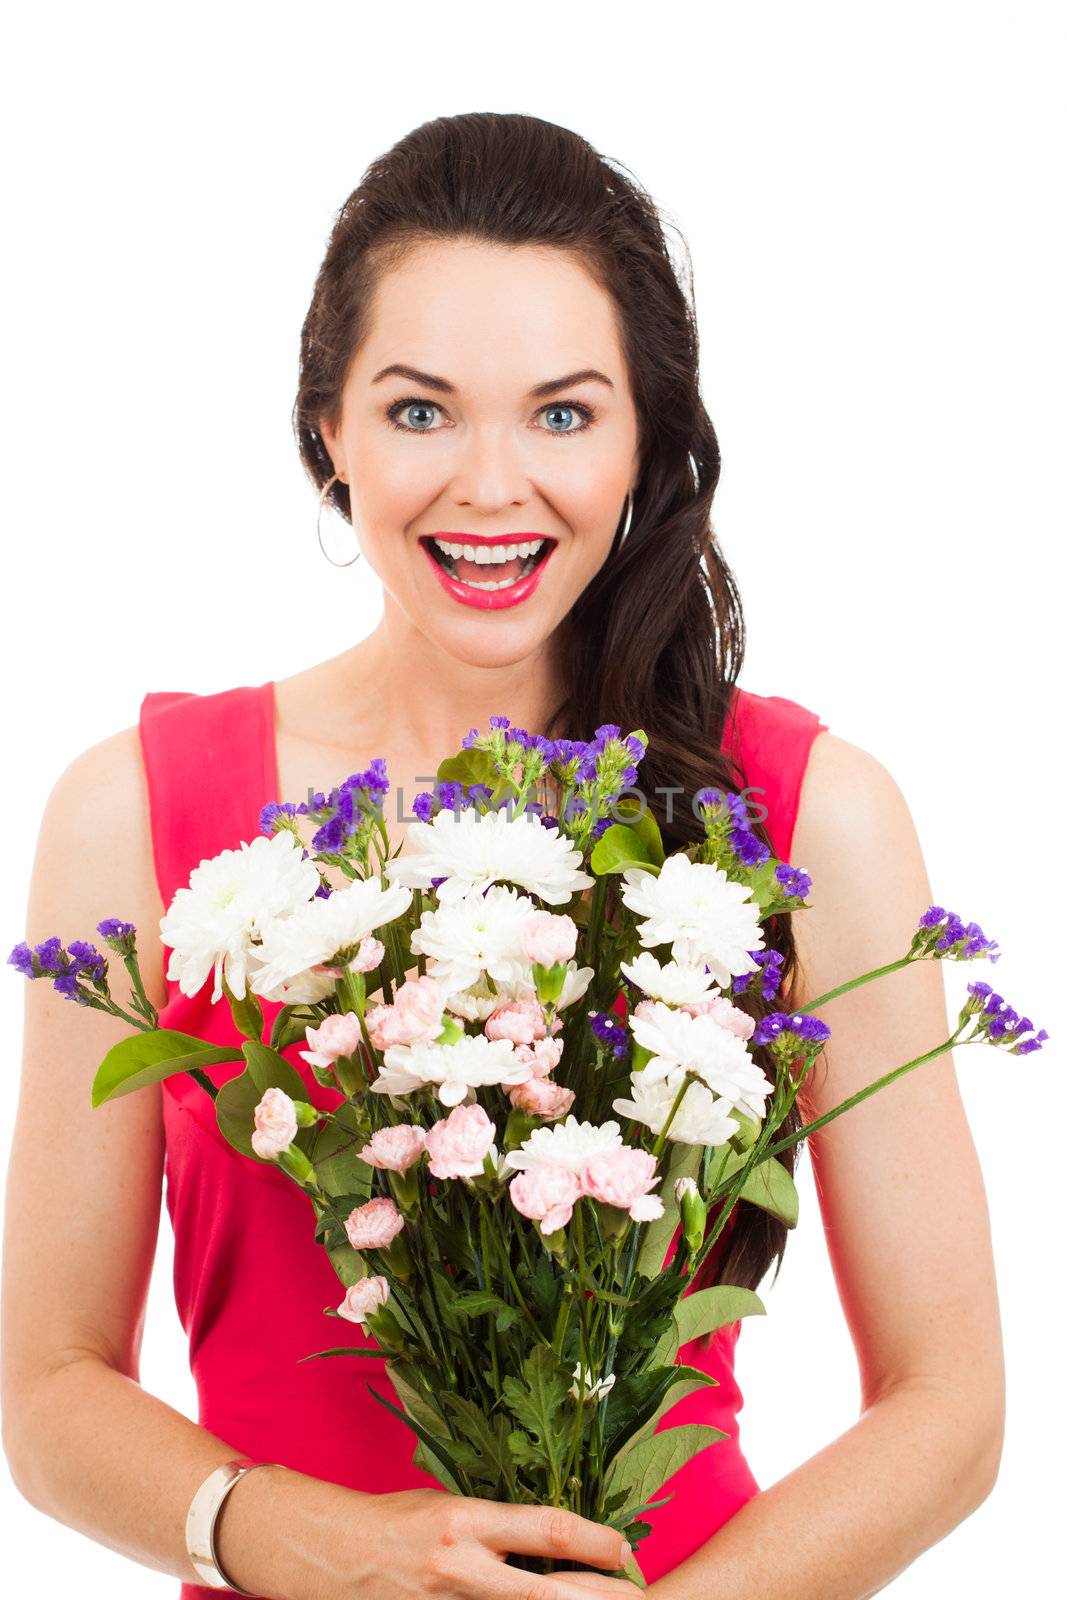 A beautiful young woman holding a bunch of flowers